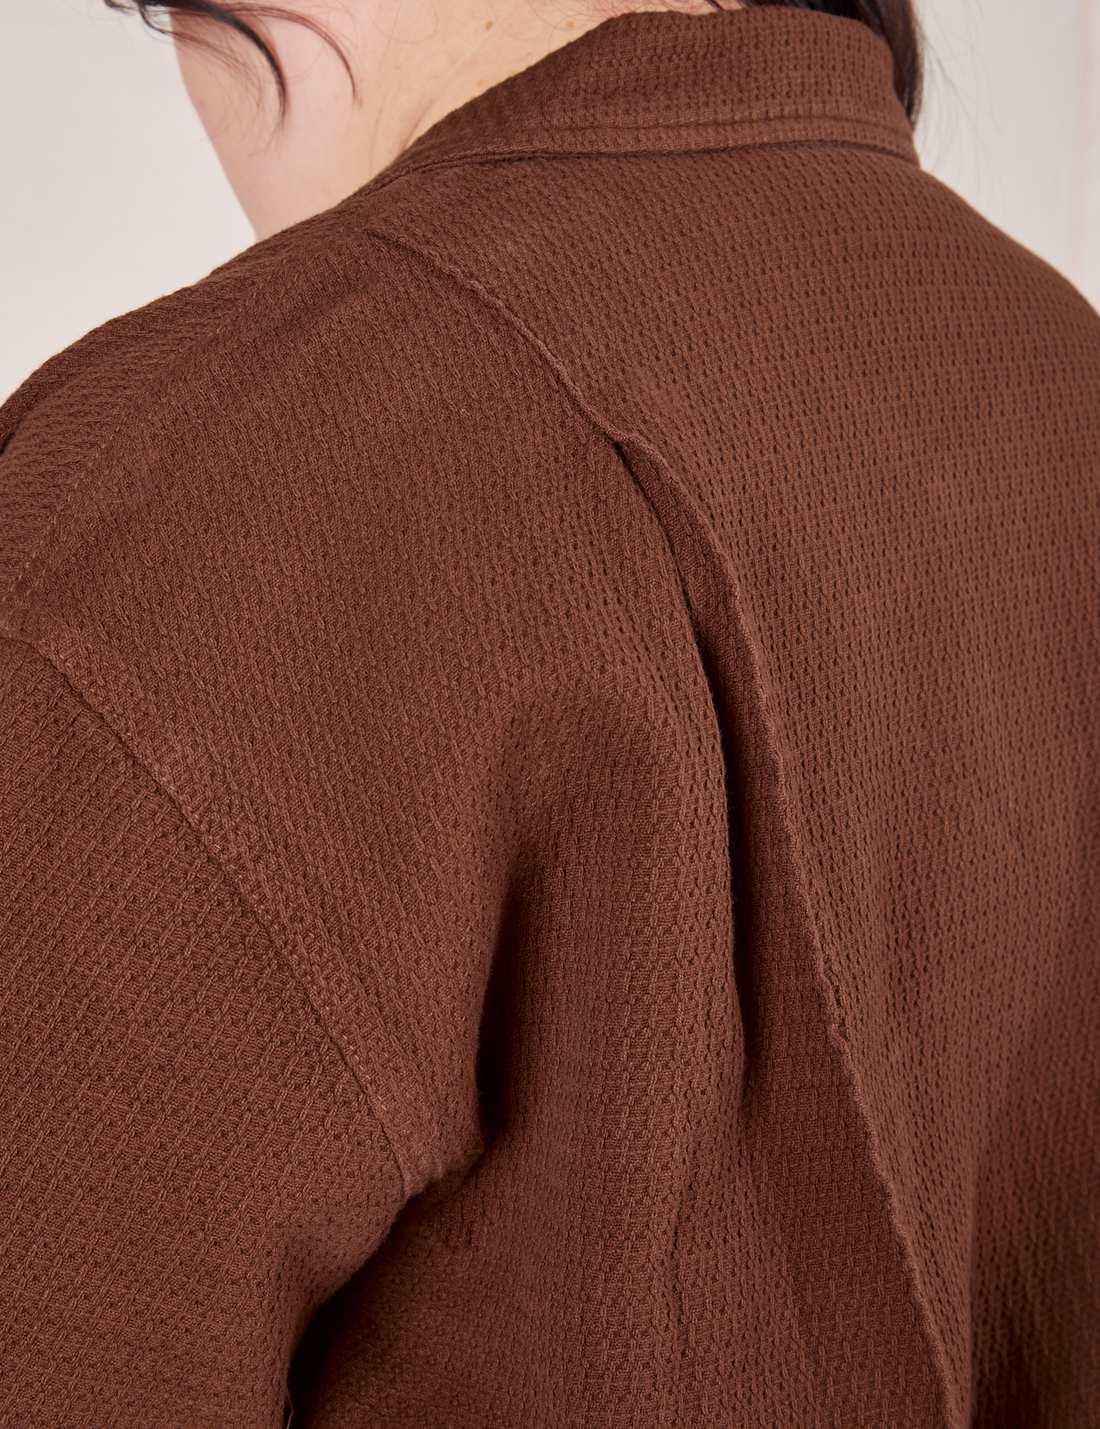 Back shoulder close up of Ricky Jacket in Fudgesicle Brown worn by Ashley